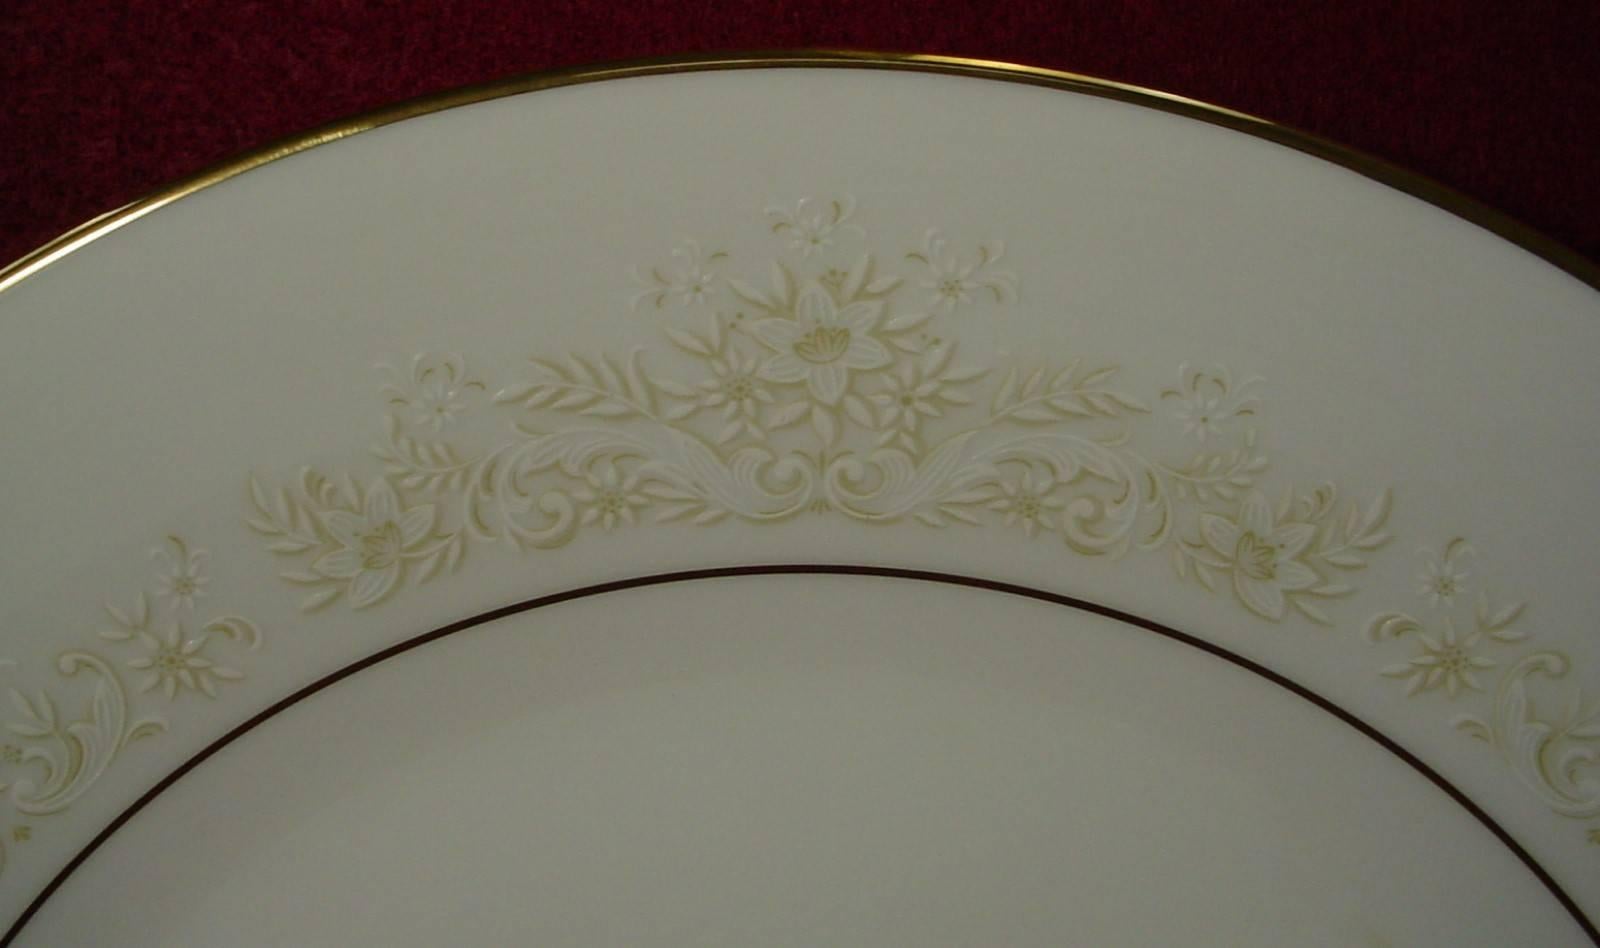 Noritake China dearest 2034 pattern eight-piece hostess serving set.

In great condition free from stains or discolorations and with only a minimum of use.

Includes creamer, sugar bowl with lid, oval vegetable serving bowl, oval meat serving